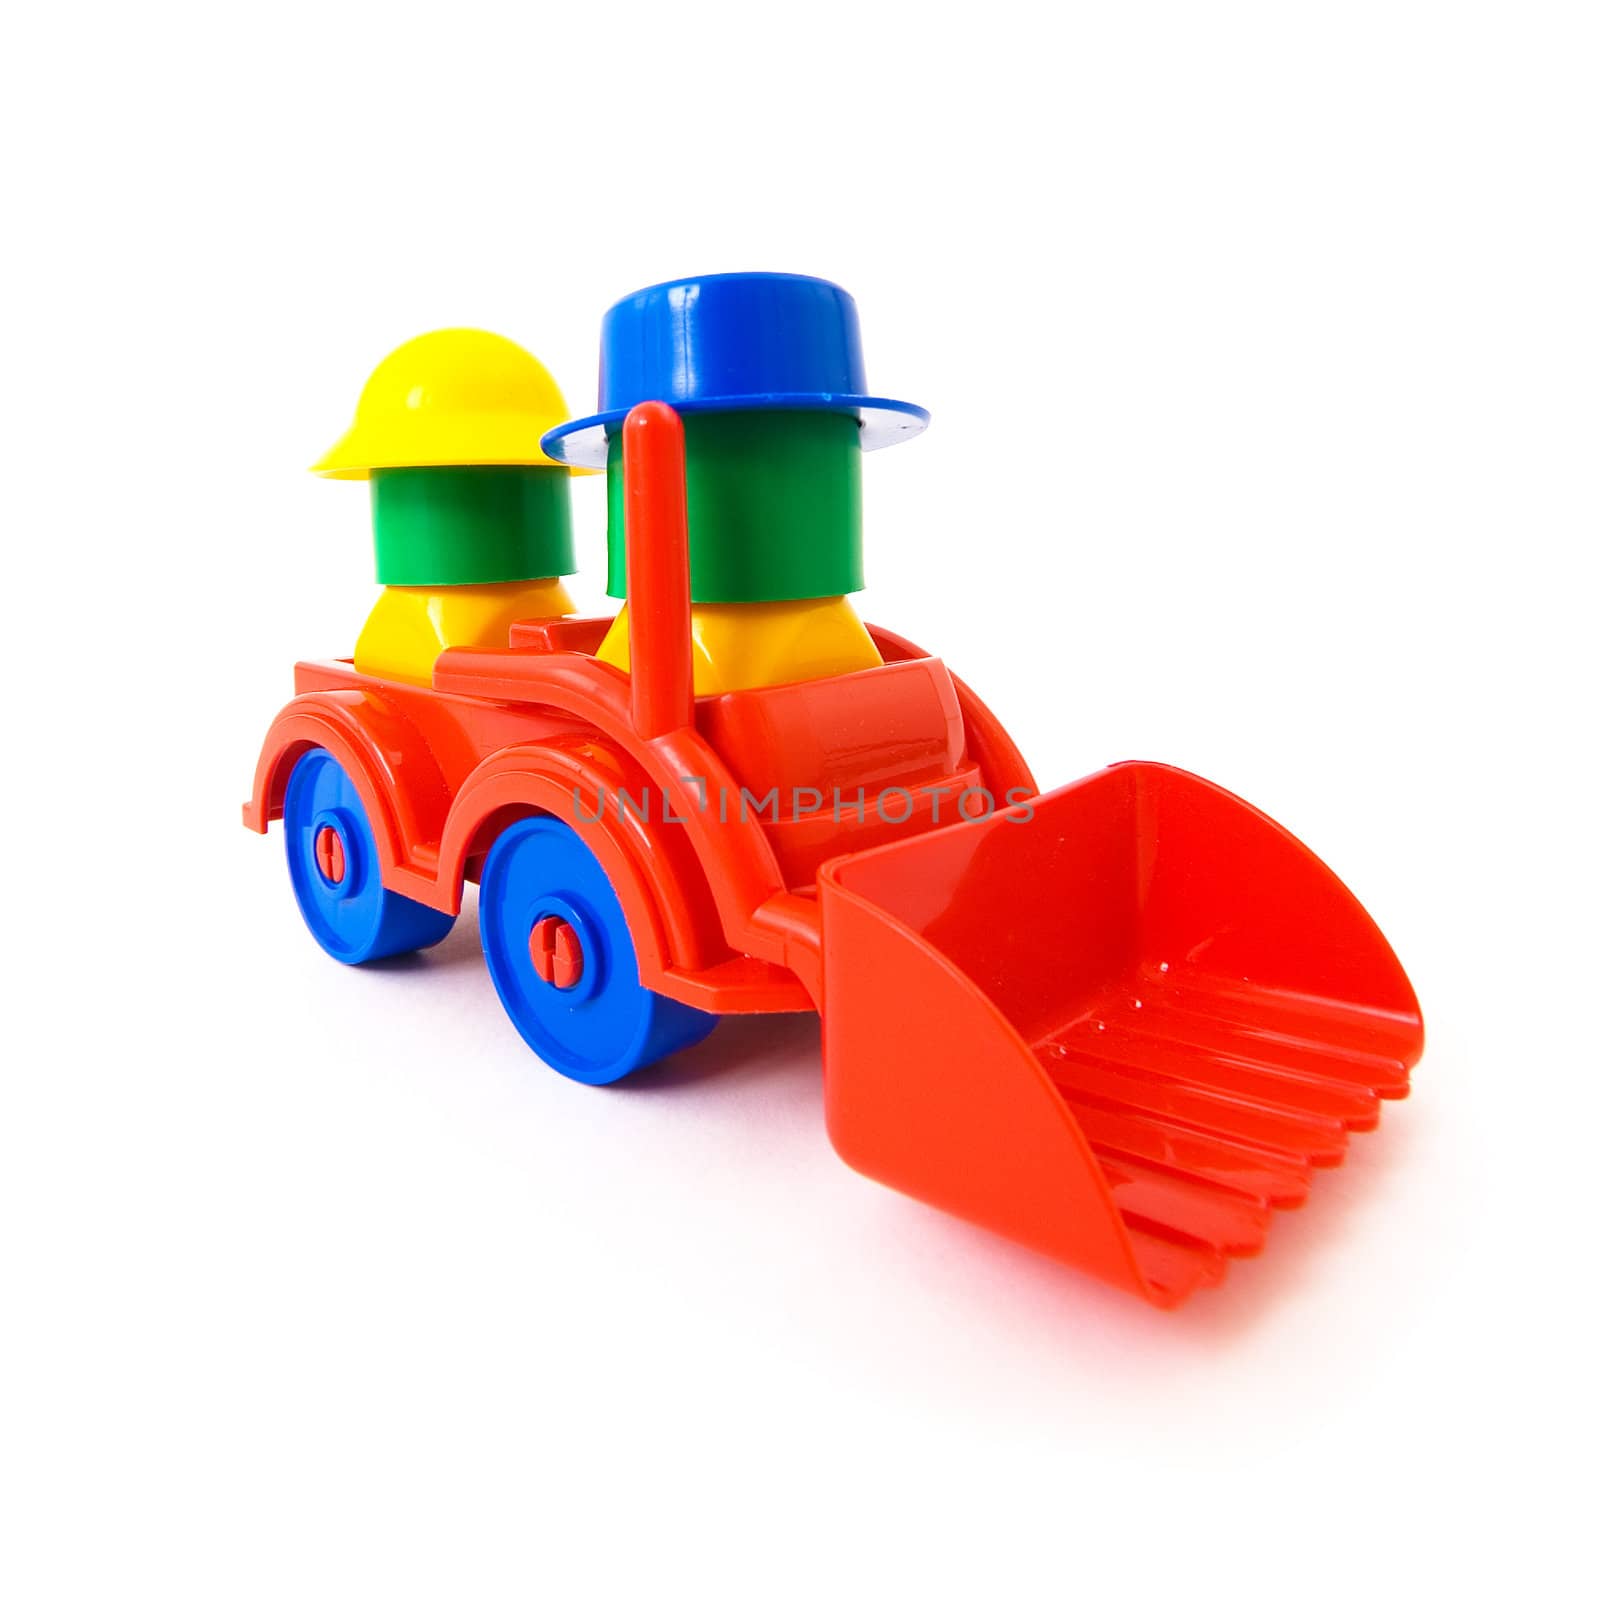 Multi-coloure toy machine on the white background